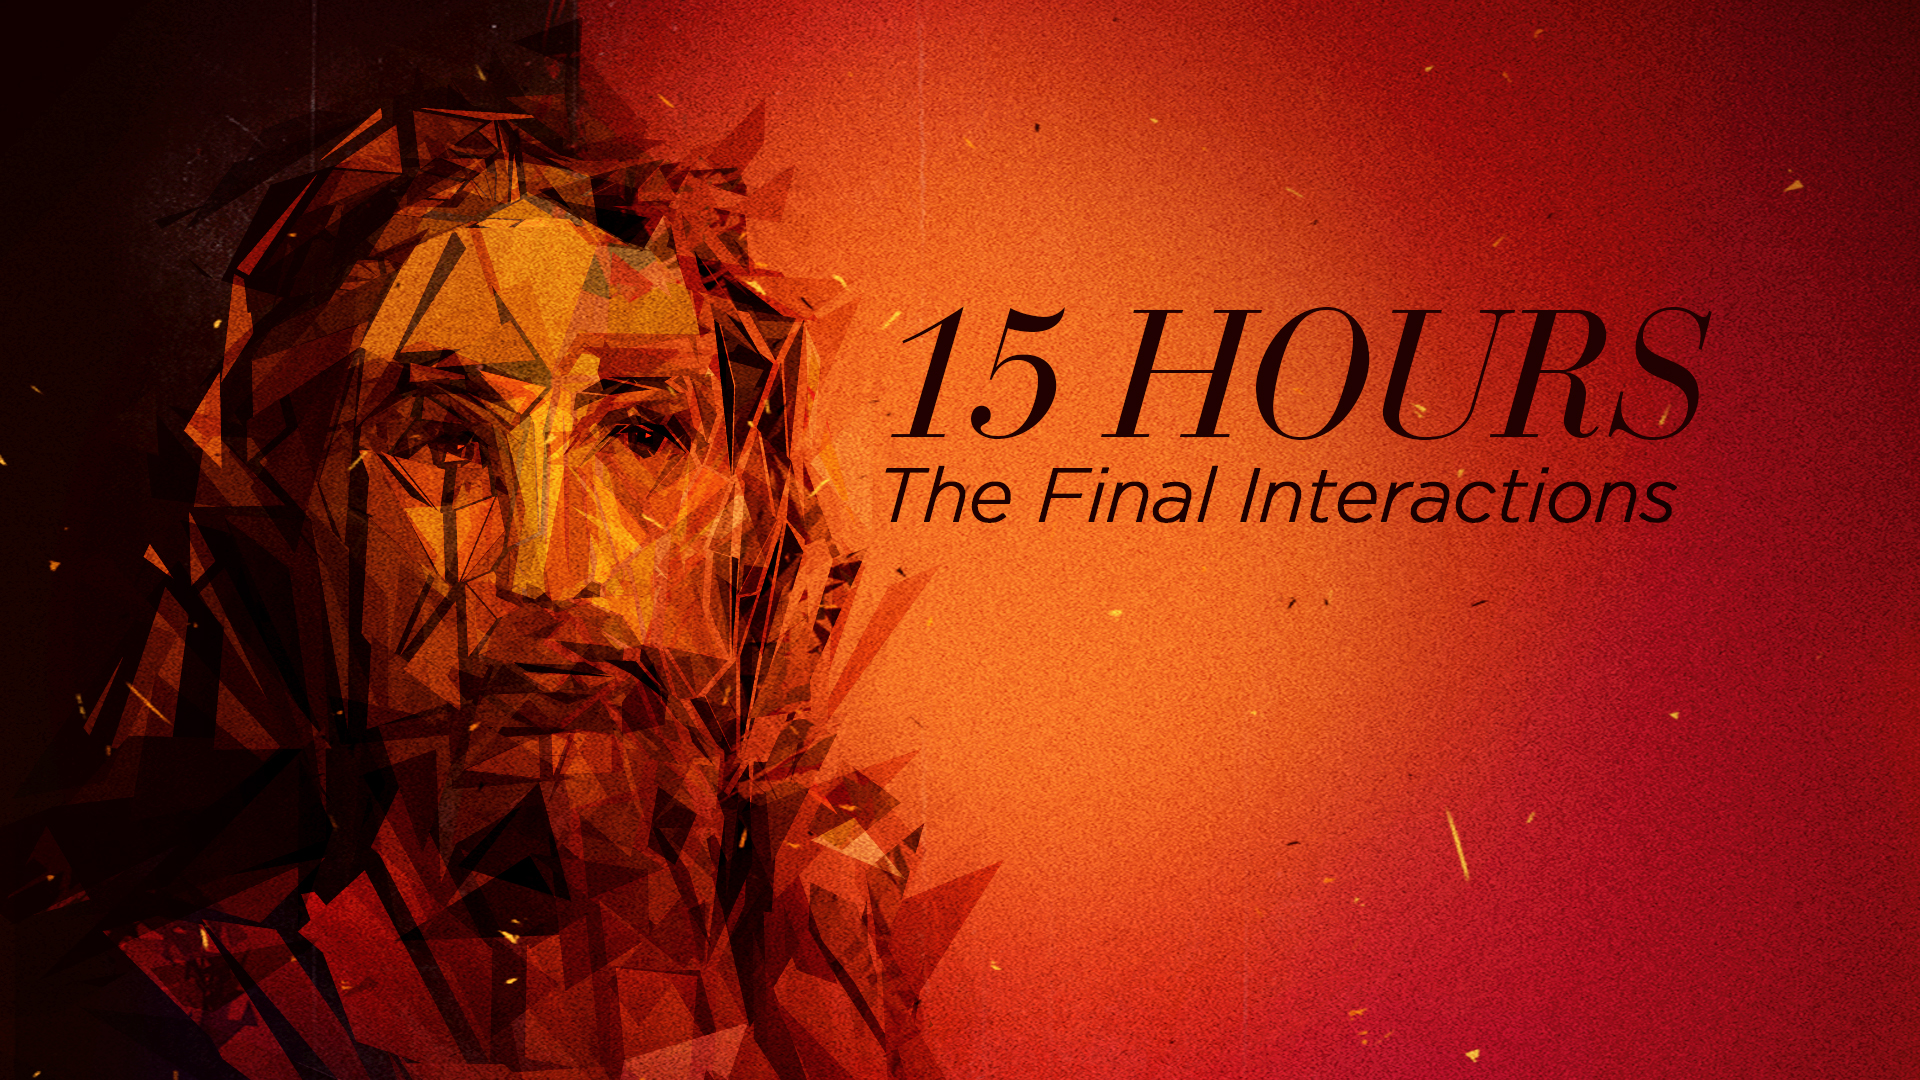  15 Hours: The Final Interactions